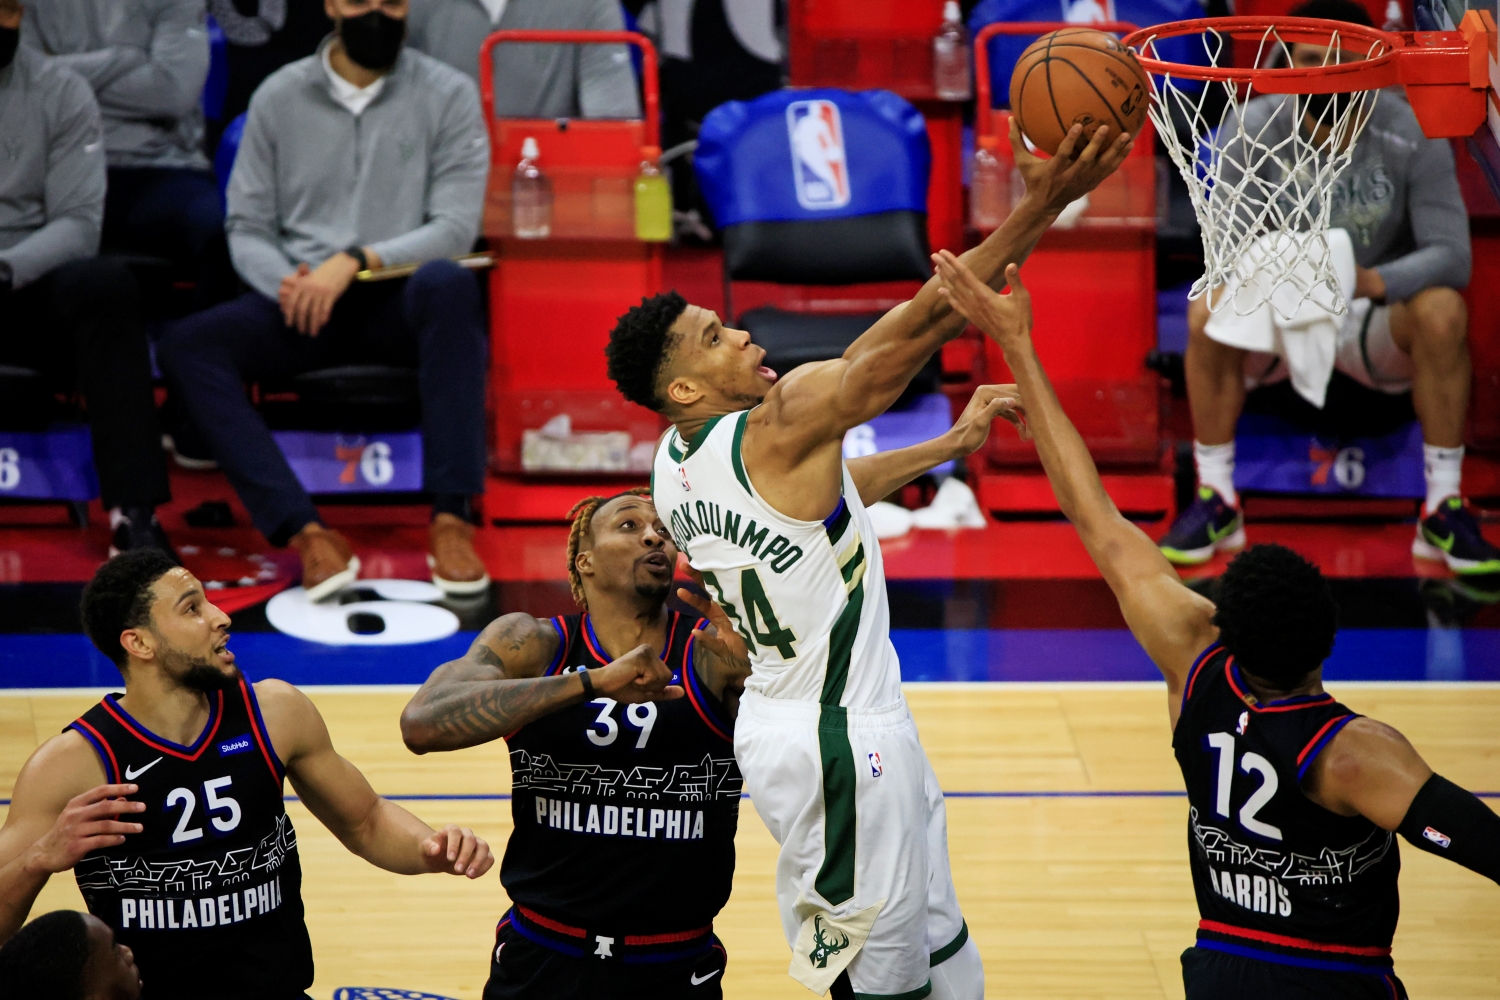 Giannis Antetokounmpo of the Milwaukee Bucks scores against the Philadelphia 76ers in a game on March 17, 2021.